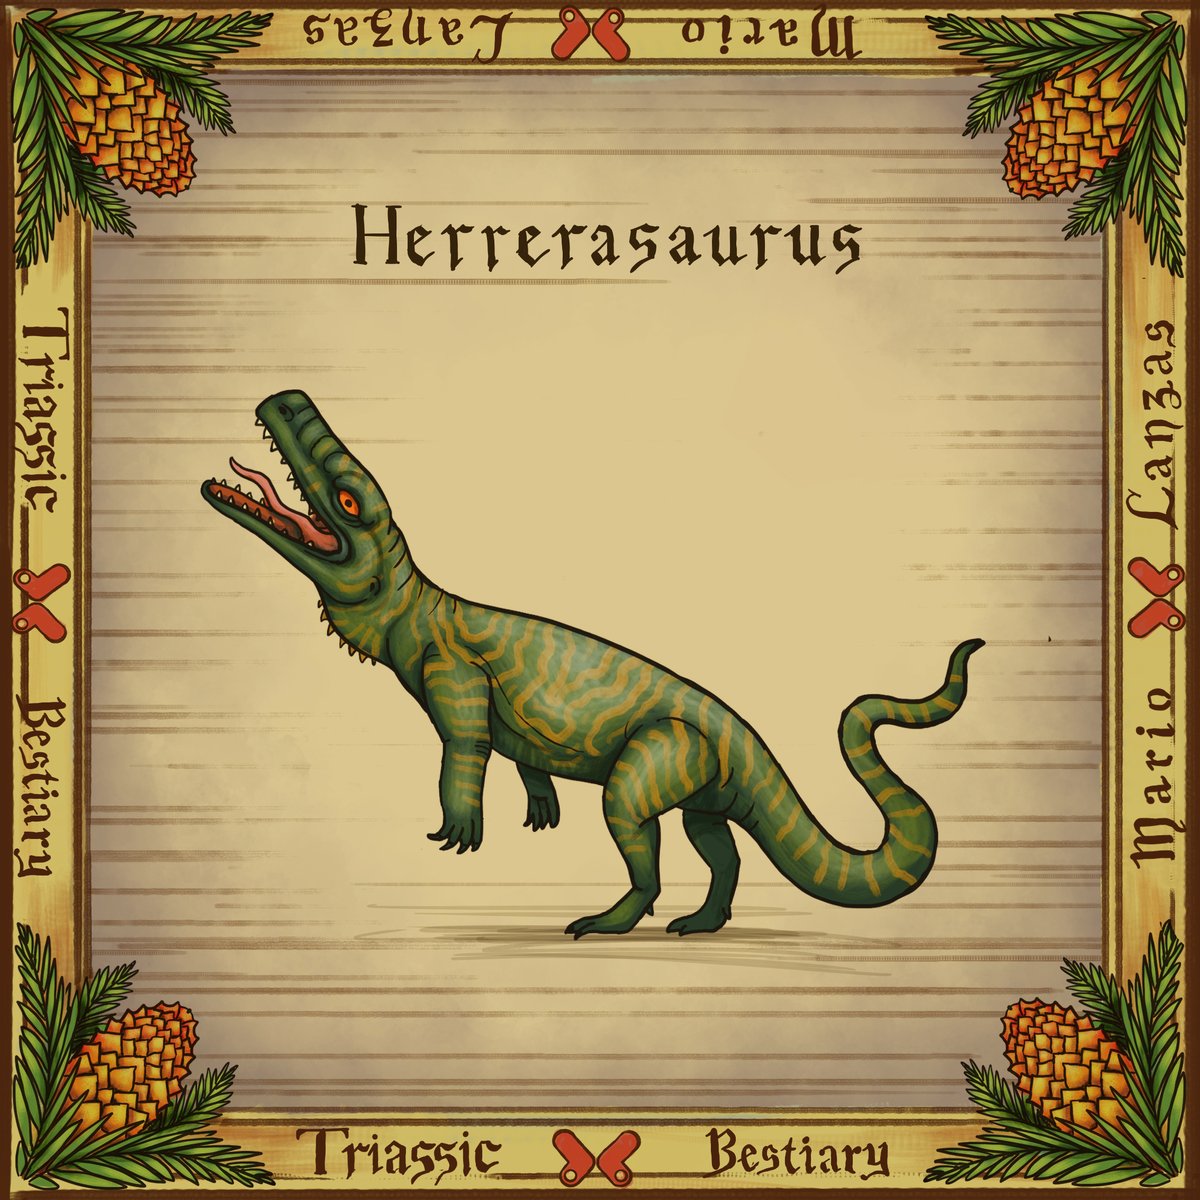 ⚜️TRIASSIC BESTIARY⚜️  (individual cards version). some prehistoric animals stylized as a medical bestiary #bestiary #triassic #paleoart #caviramus #tanystropheus #nothosaurus #medievalart